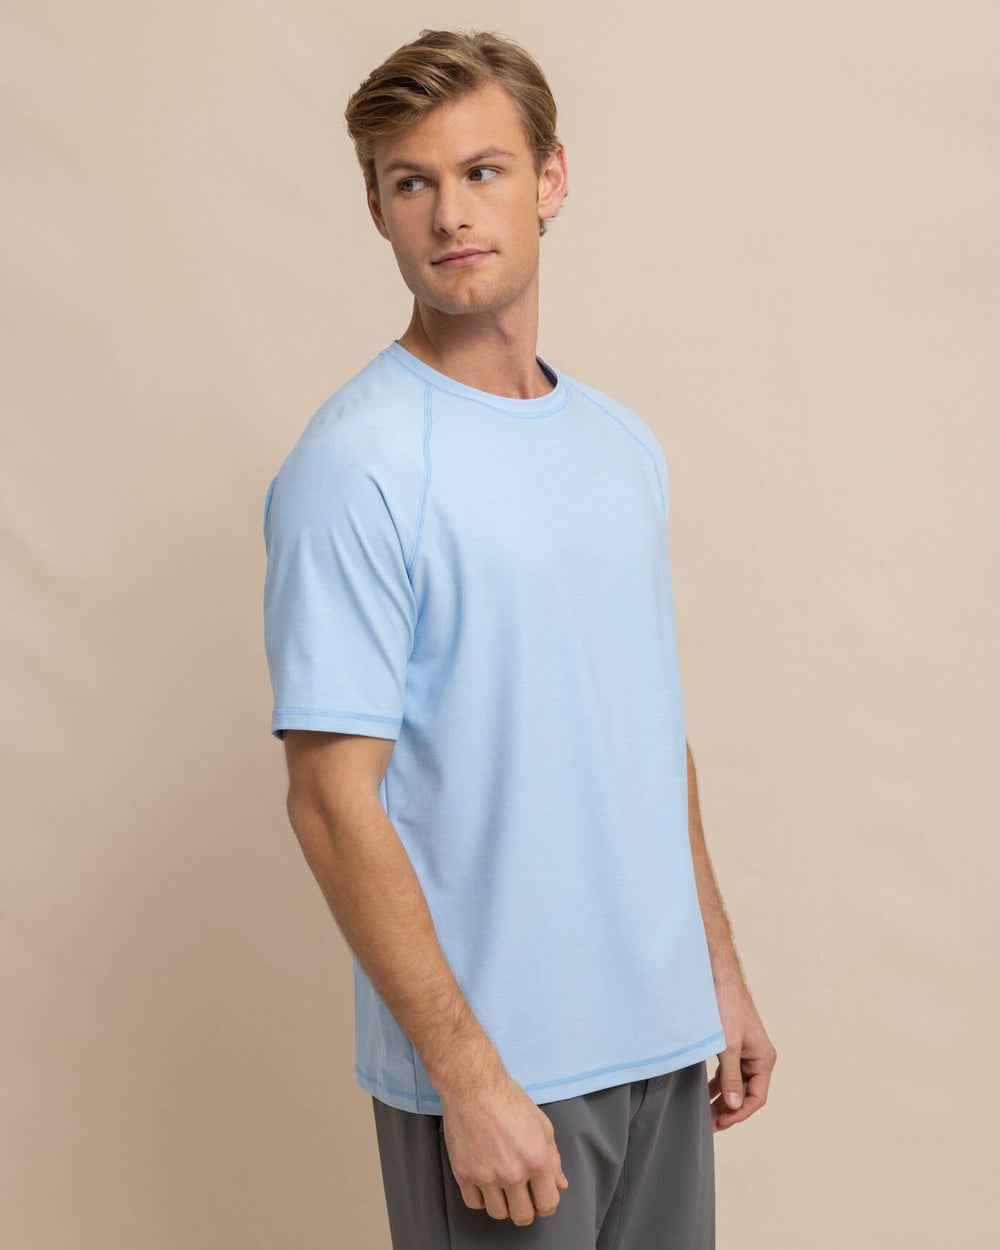 The front view of the Southern Tide brrr illiant Performance T-Shirt by Southern Tide - Clearwater Blue